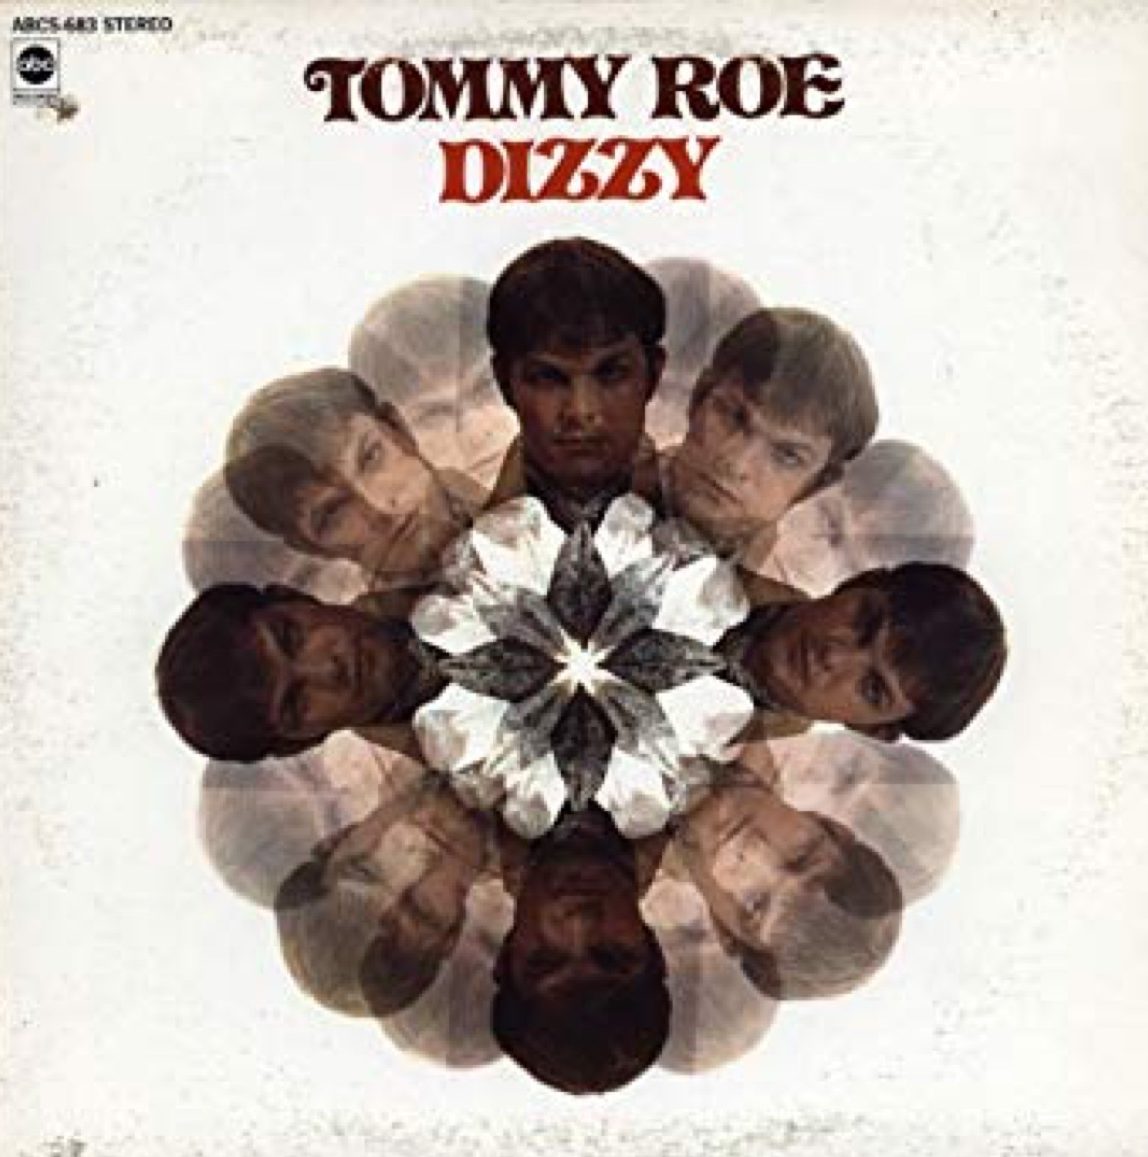 dizzy tommy toe single cover, top 50 songs 1969